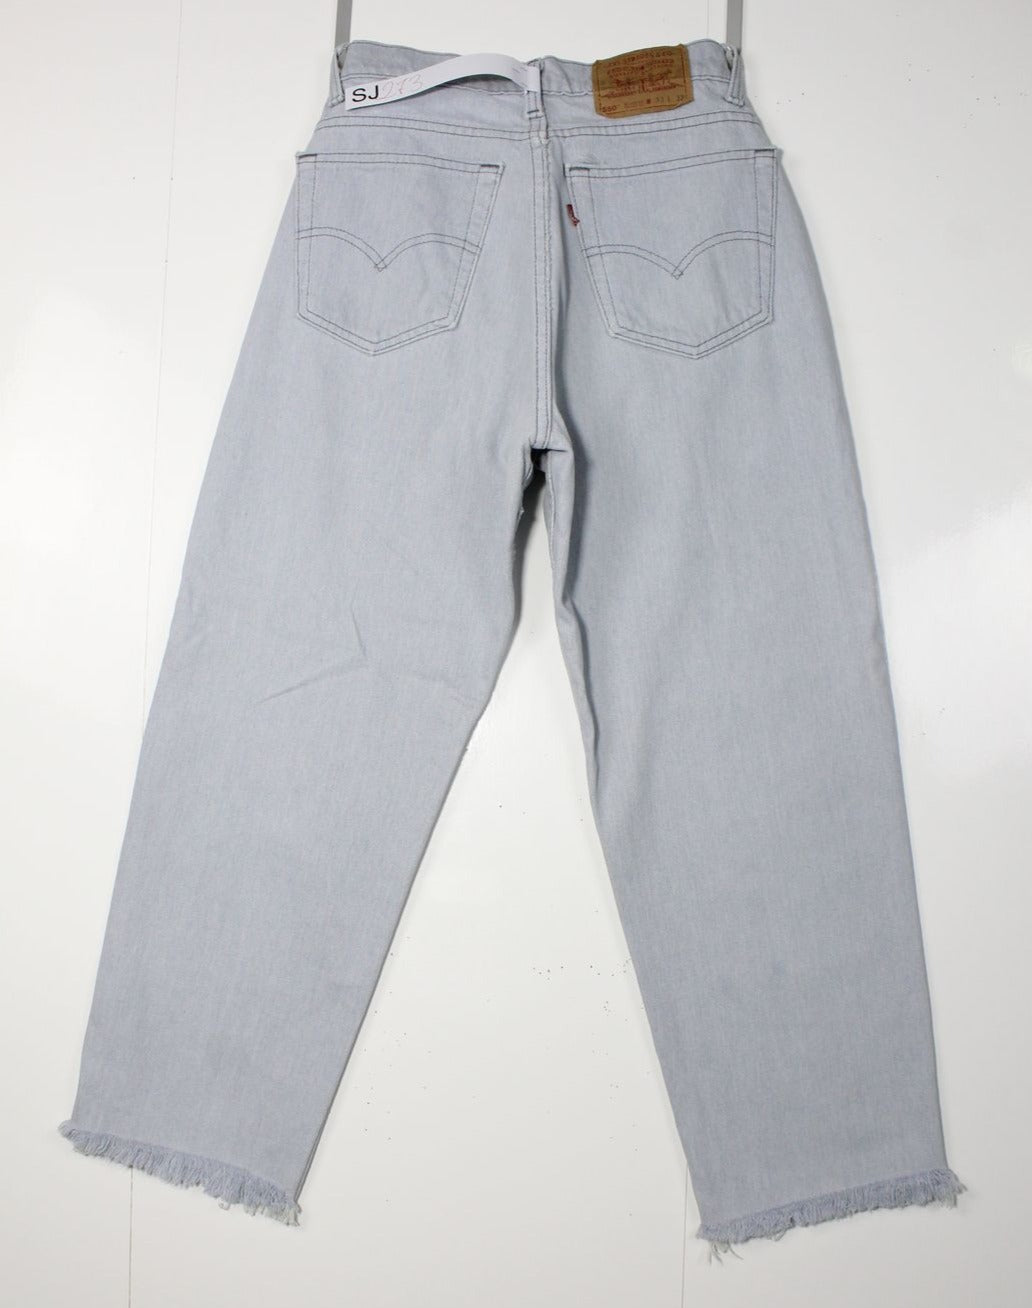 Levi's 550 Relaxed Fit Denim W33 L32 Made In USA Jeans Vintage